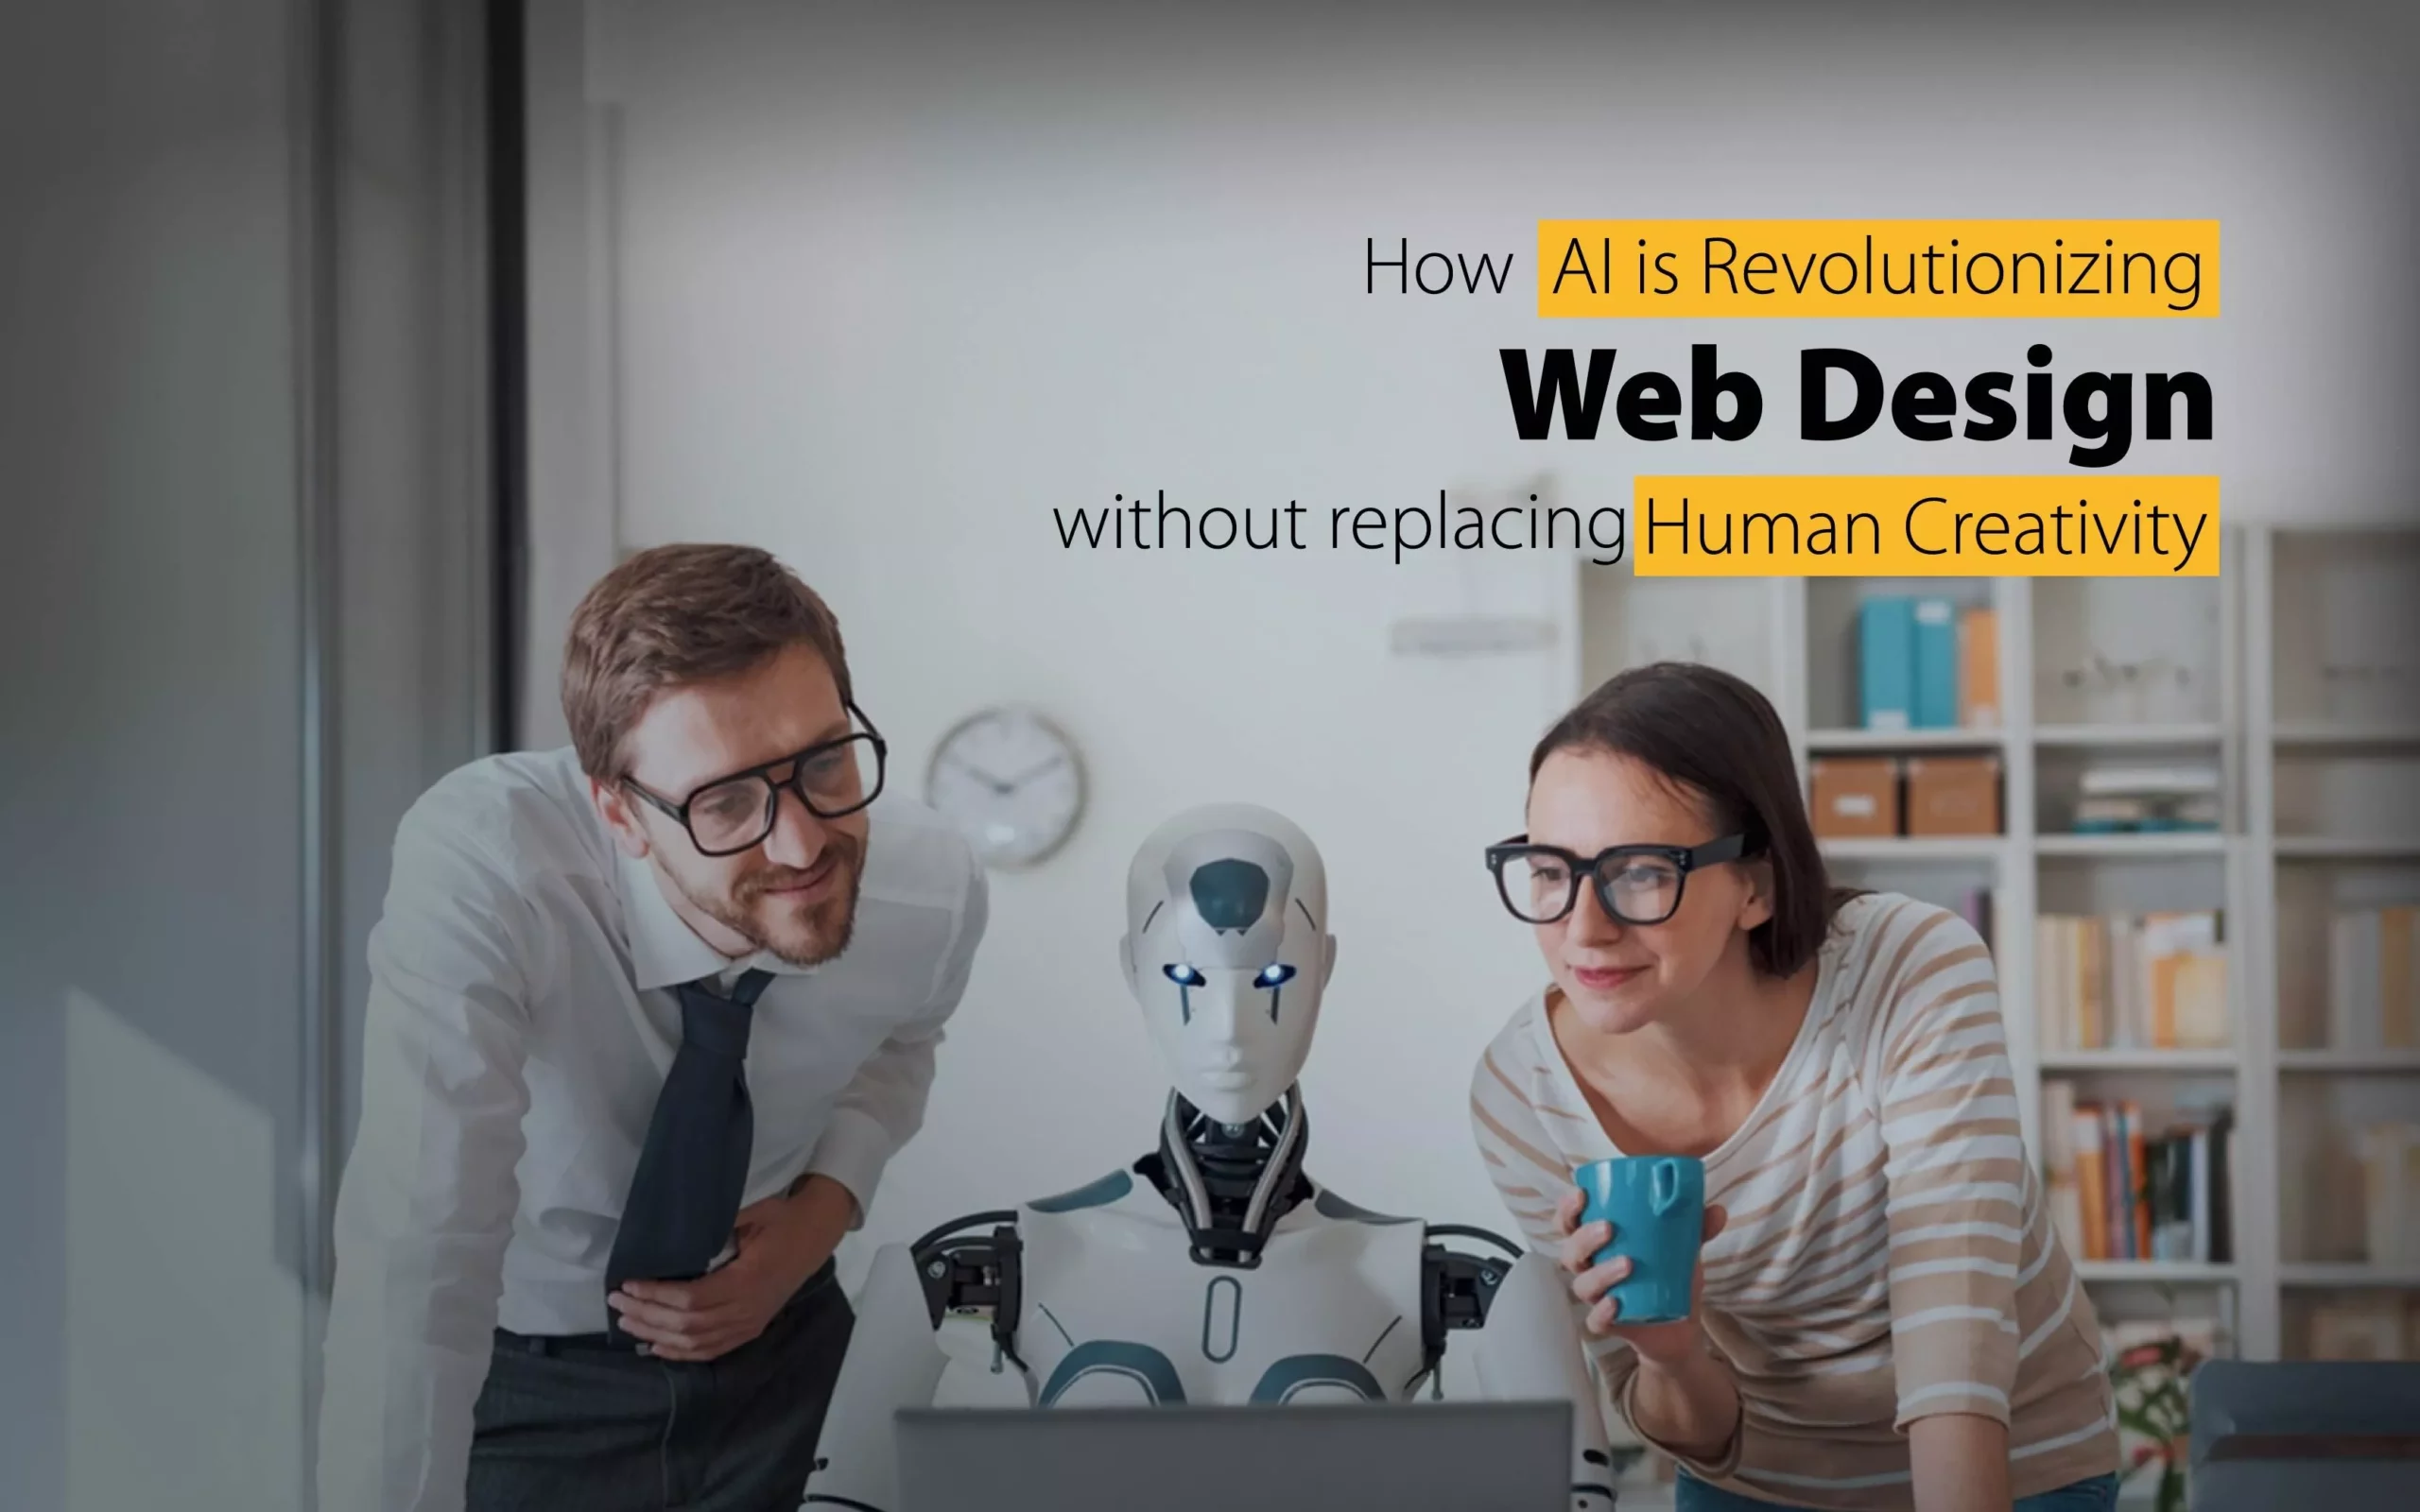 Embracing the Future: How AI is Revolutionizing Web Design Without Replacing Human Creativity